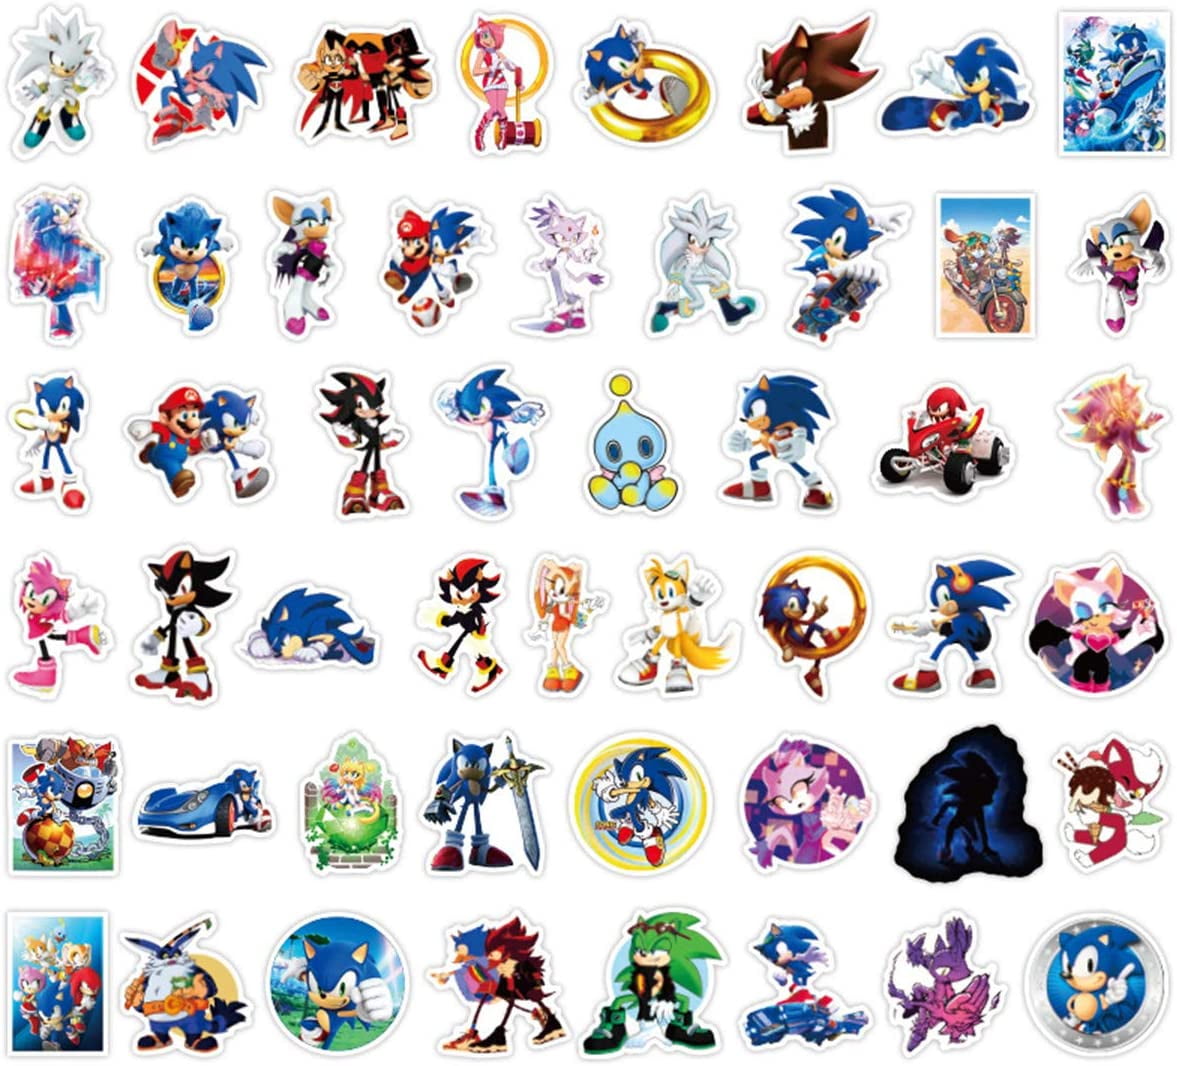 100pcs Quality PVC Sonic the Hedgehog Stickers for the Laptop Skateboard 